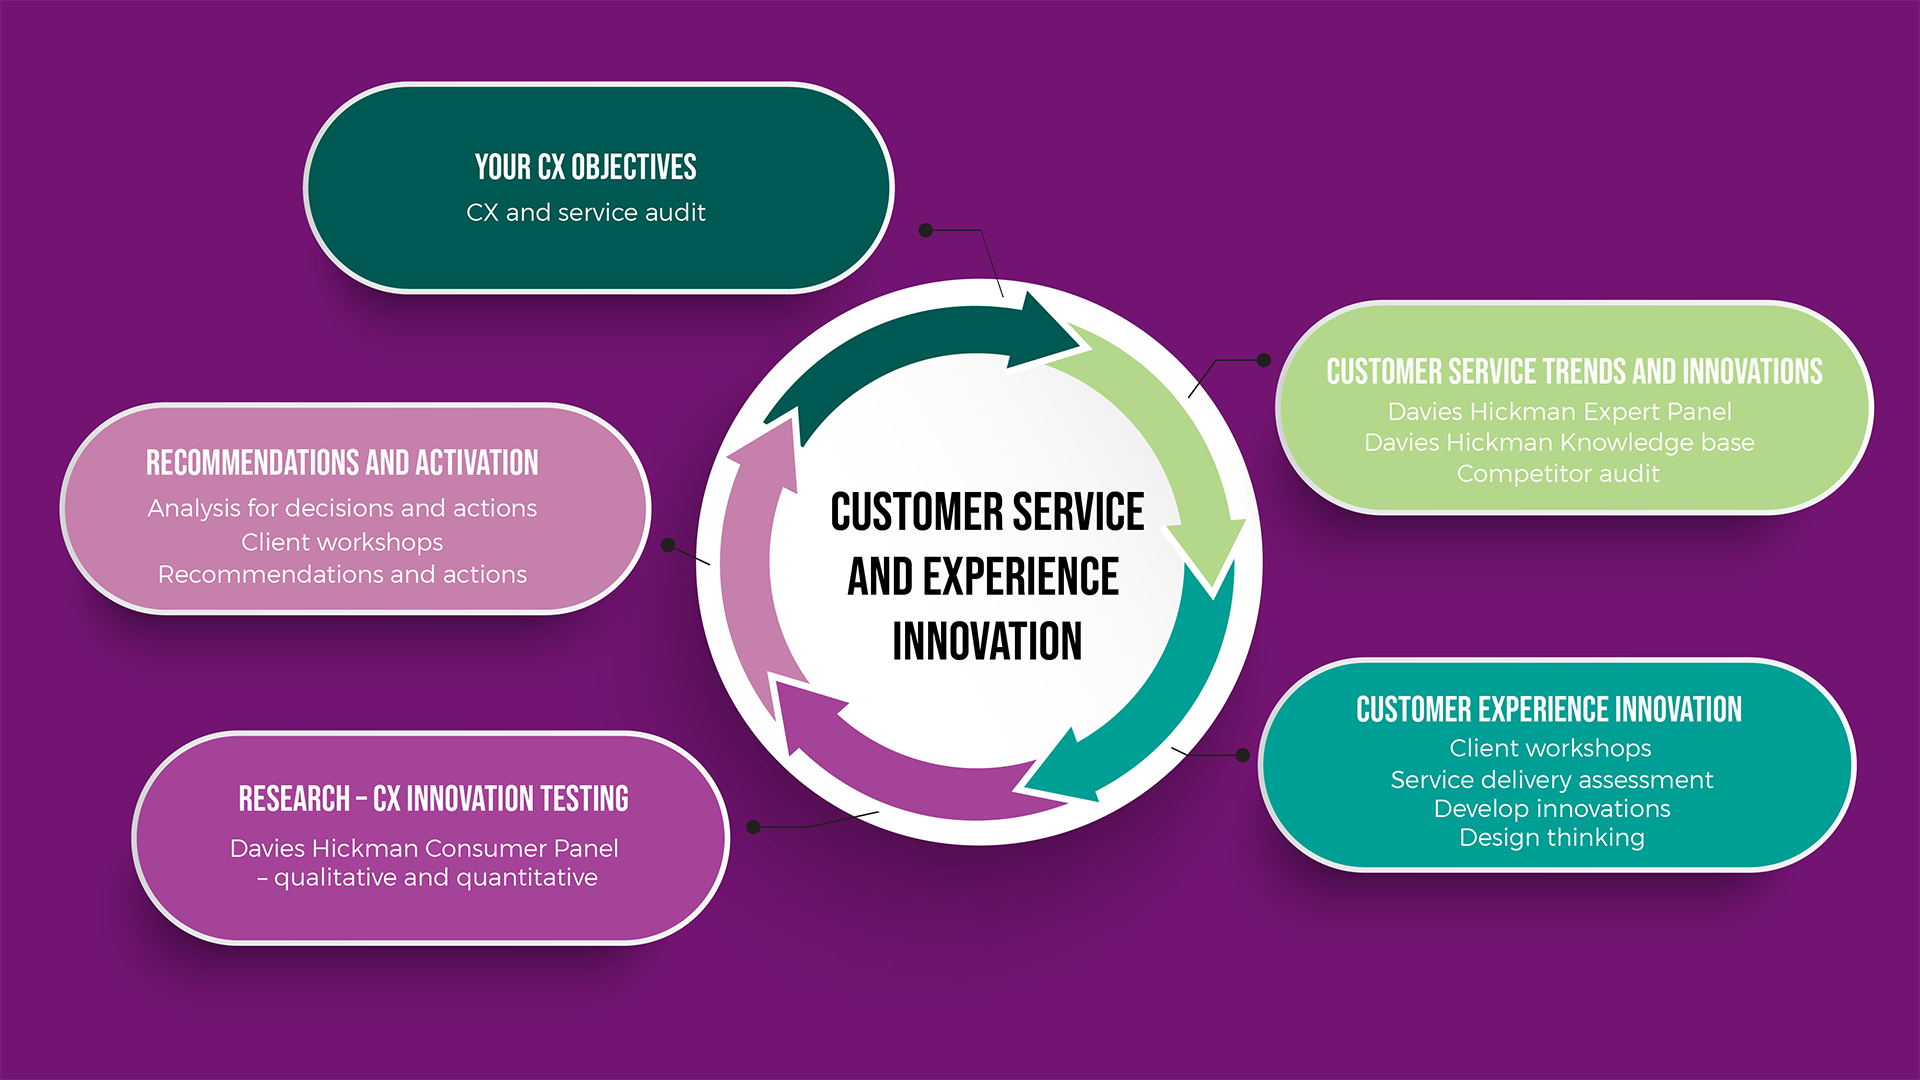 Customer service and experience innovation